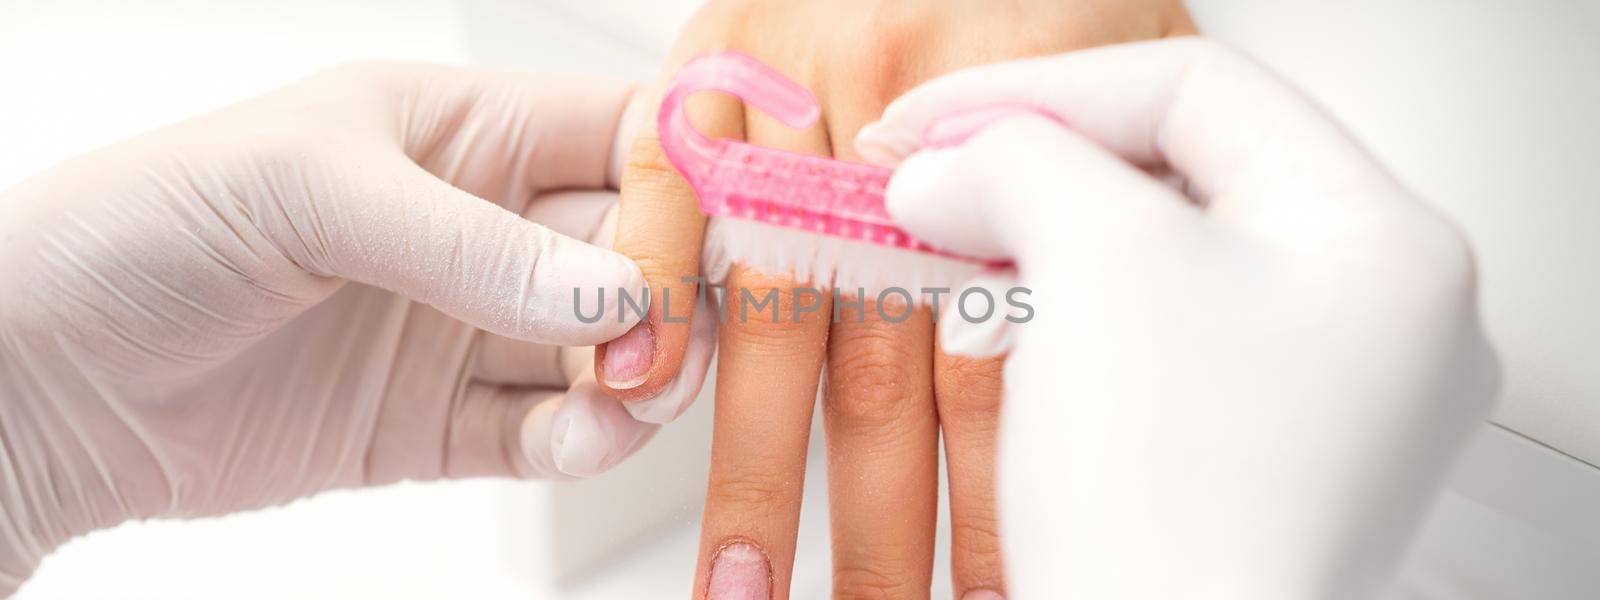 Manicurist cleans dust from the woman's nails with the plastic brush in a nail salon